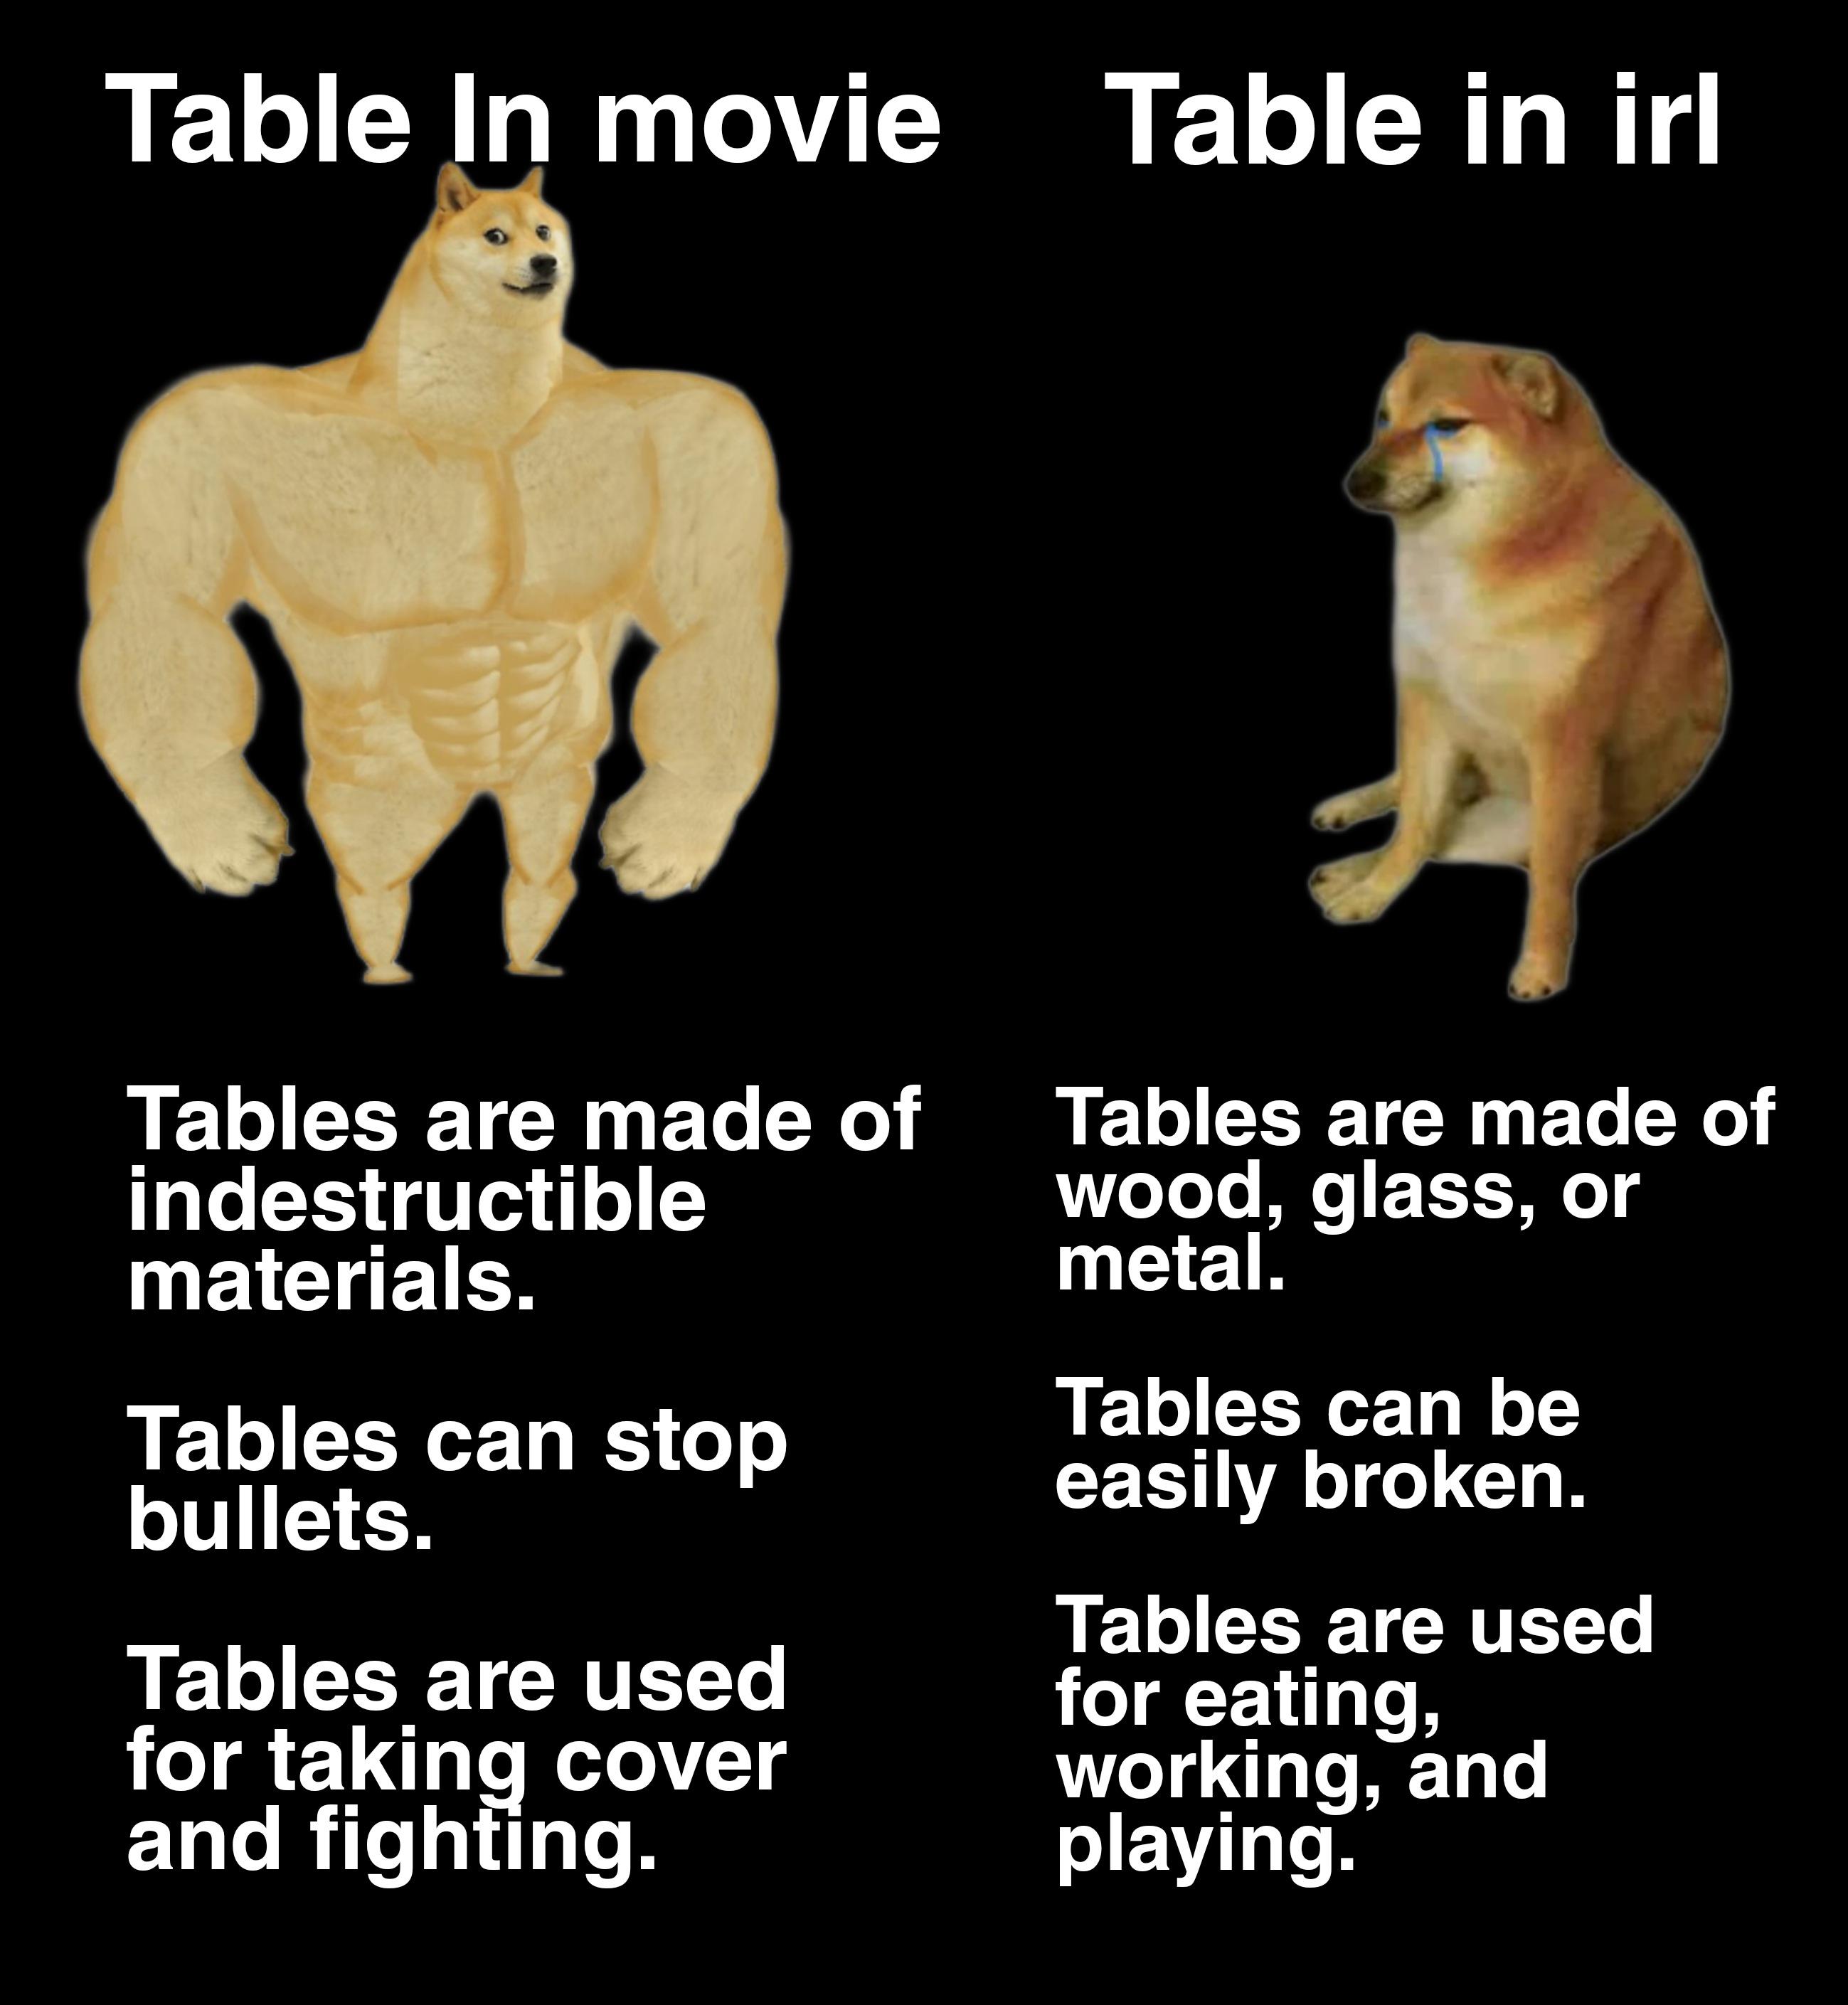 funny pics and memes - fauna - Table In movie Table in irl Tables are made of indestructible materials. Tables can stop bullets. Tables are used for taking cover and fighting. Tables are made of wood, glass, or metal. Tables can be easily broken. Tables a